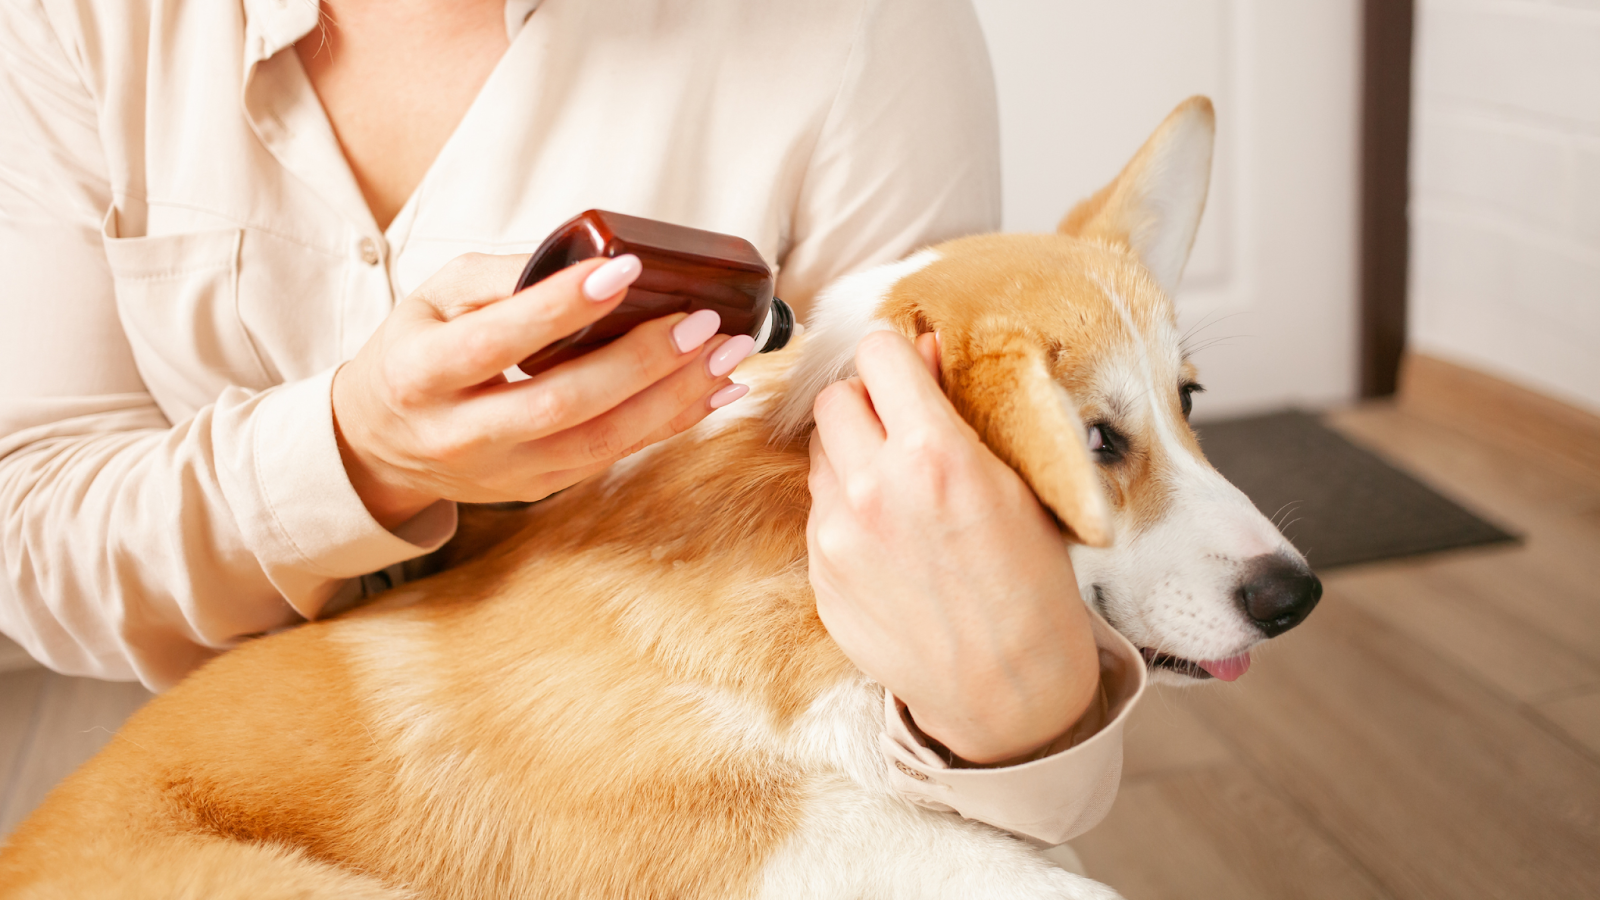 There are many treatments for dog fleas, including topical and oral medications, shampoos, collars, and more.